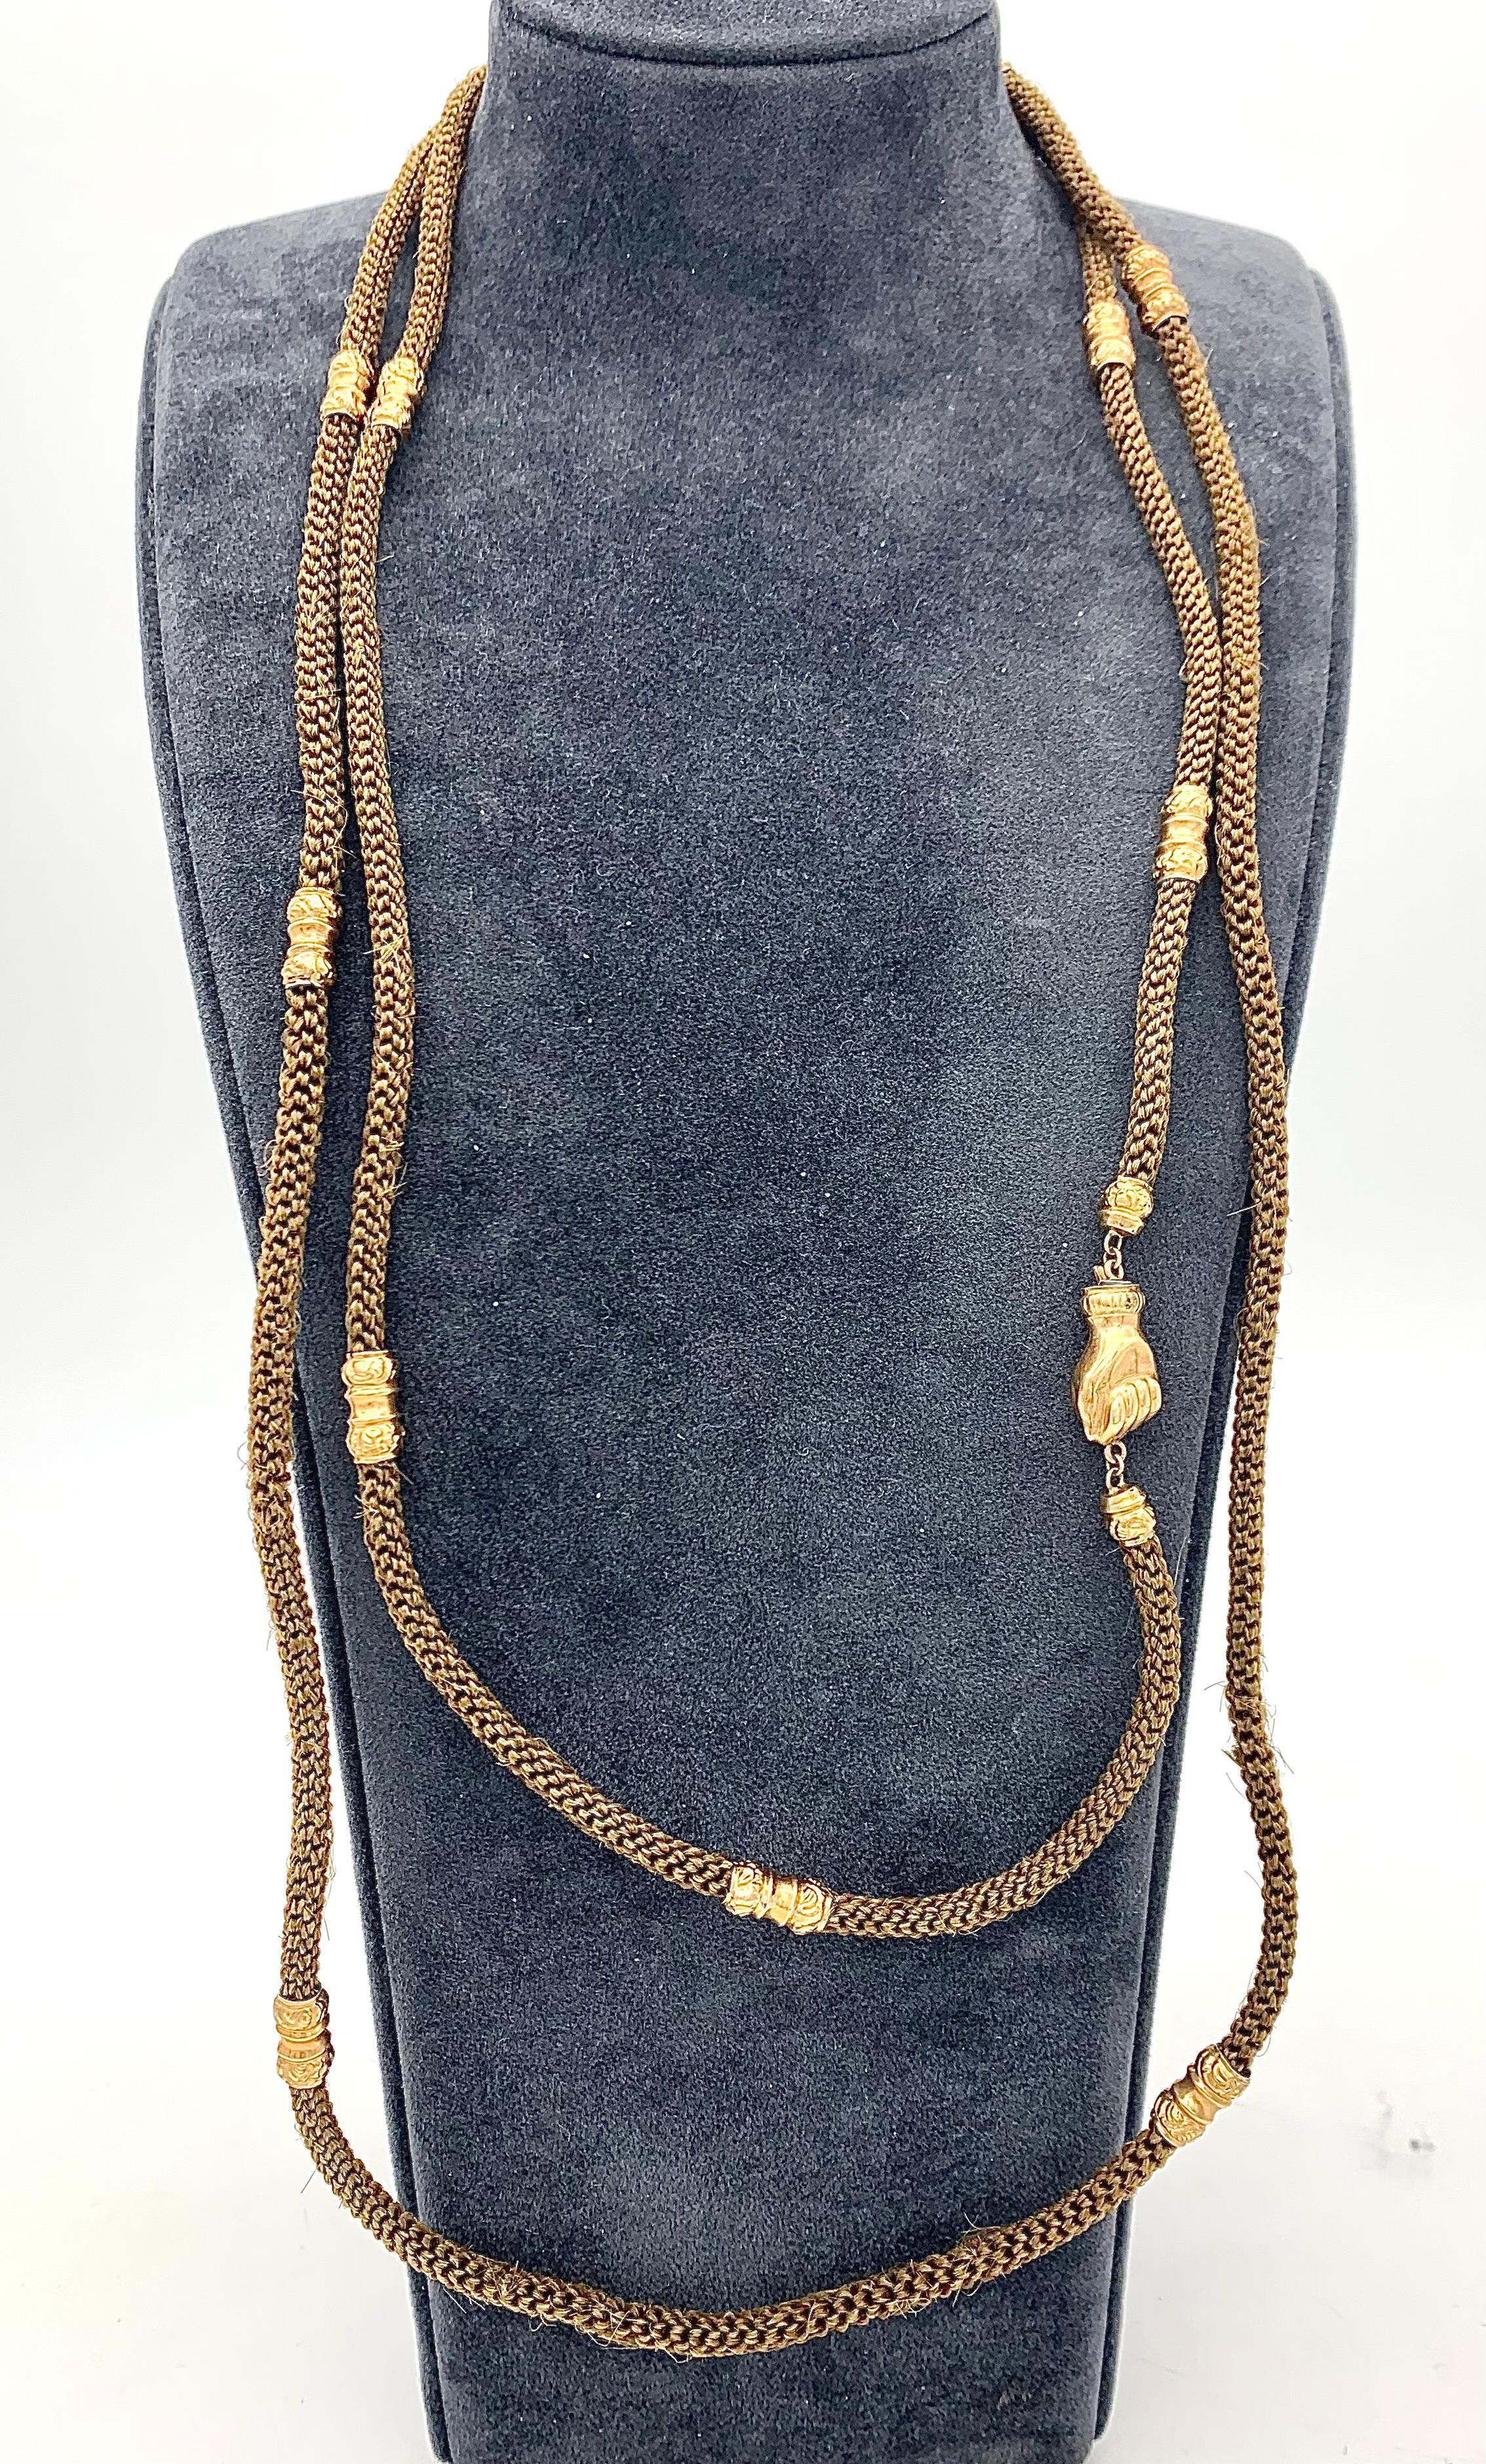 This beautiful hair chain was created in 1825 ca. It is made out of handwoven brown hair and 14 karat gold. The chain was intended as a token of friendship and sentiment. The hair alternates with twelve finely embossed gold elements. Both ends of